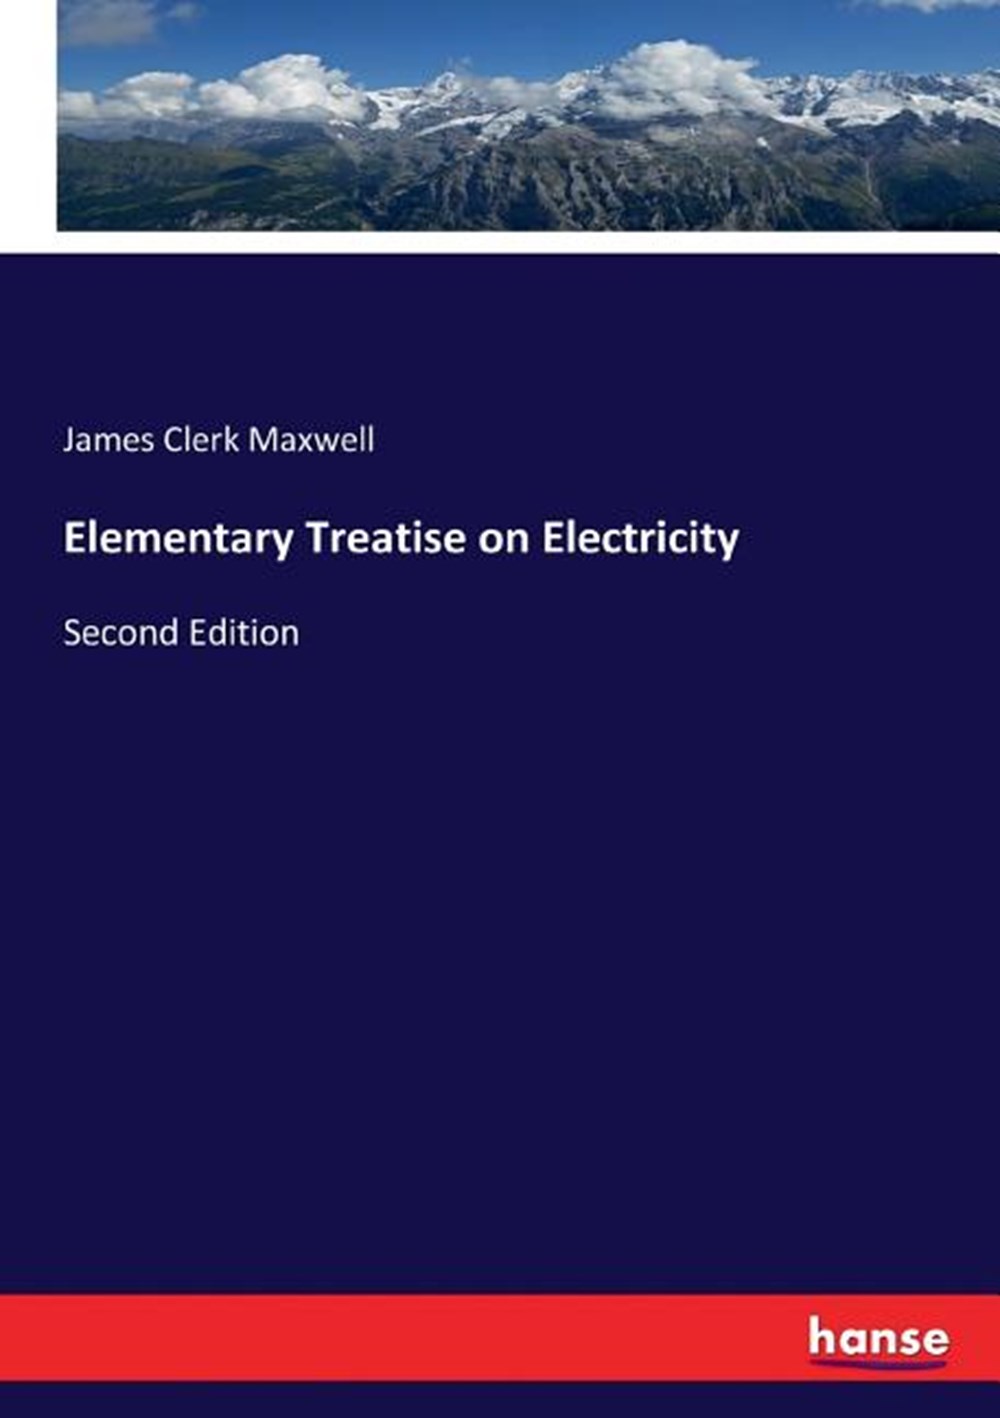 Elementary Treatise on Electricity: Second Edition